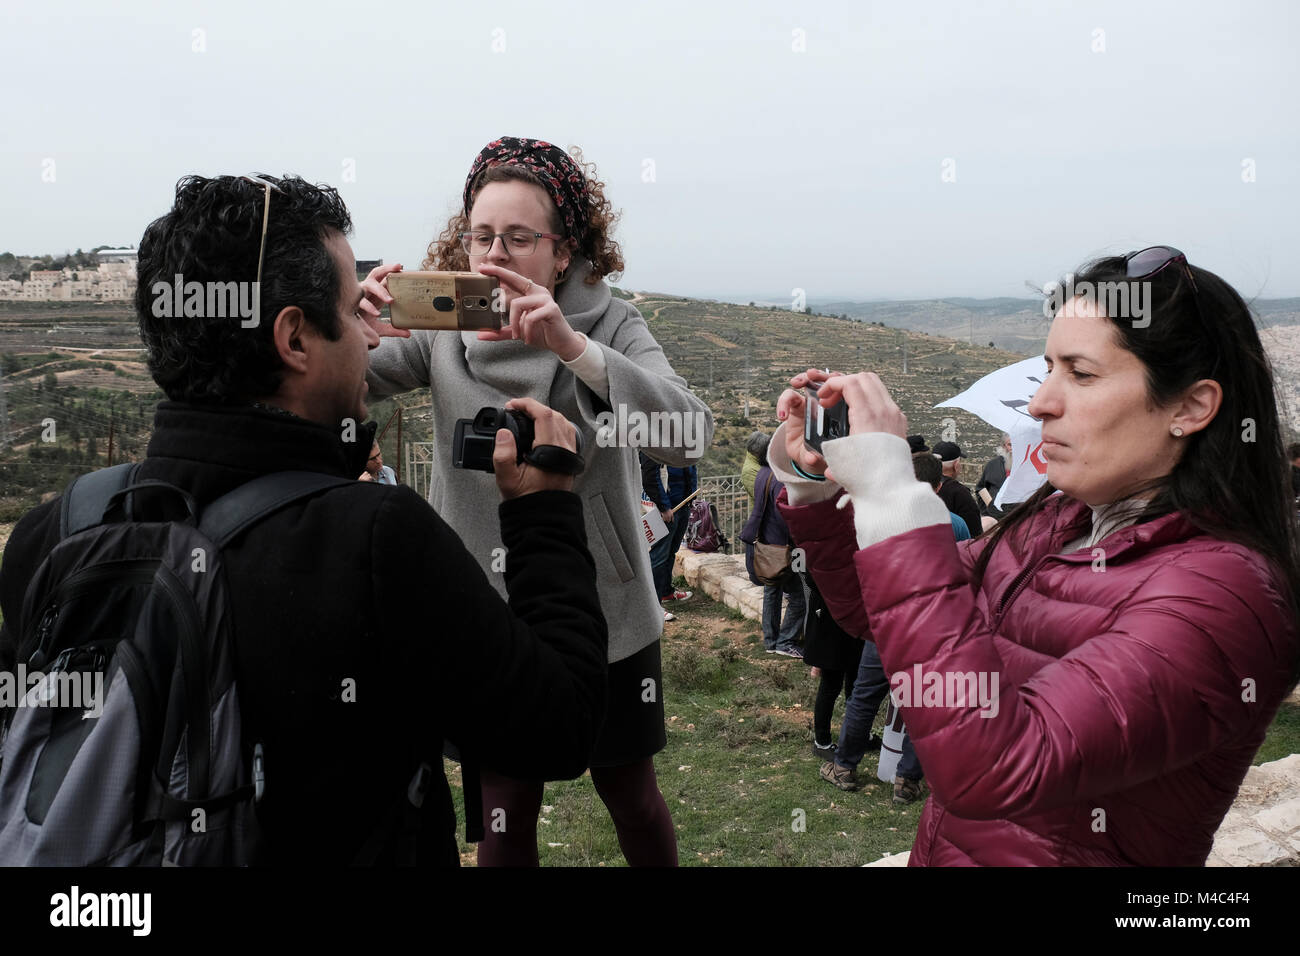 Nativ Ha'avot, Israel. 15th Feb, 2018. Female activists from the right wing Zionist organization Im Tirtzu confront a member of the left-wing Peace Now movement protesting next to the illegal outpost of Nativ Ha'avot on following Israeli government attempts to postpone the removal of some of the houses in the outpost despite the Supreme Court ruling after accepting the petition of a group of Palestinians who argued the homes had been partially built illegally on their land. Credit: Eddie Gerald/Alamy Live News Stock Photo